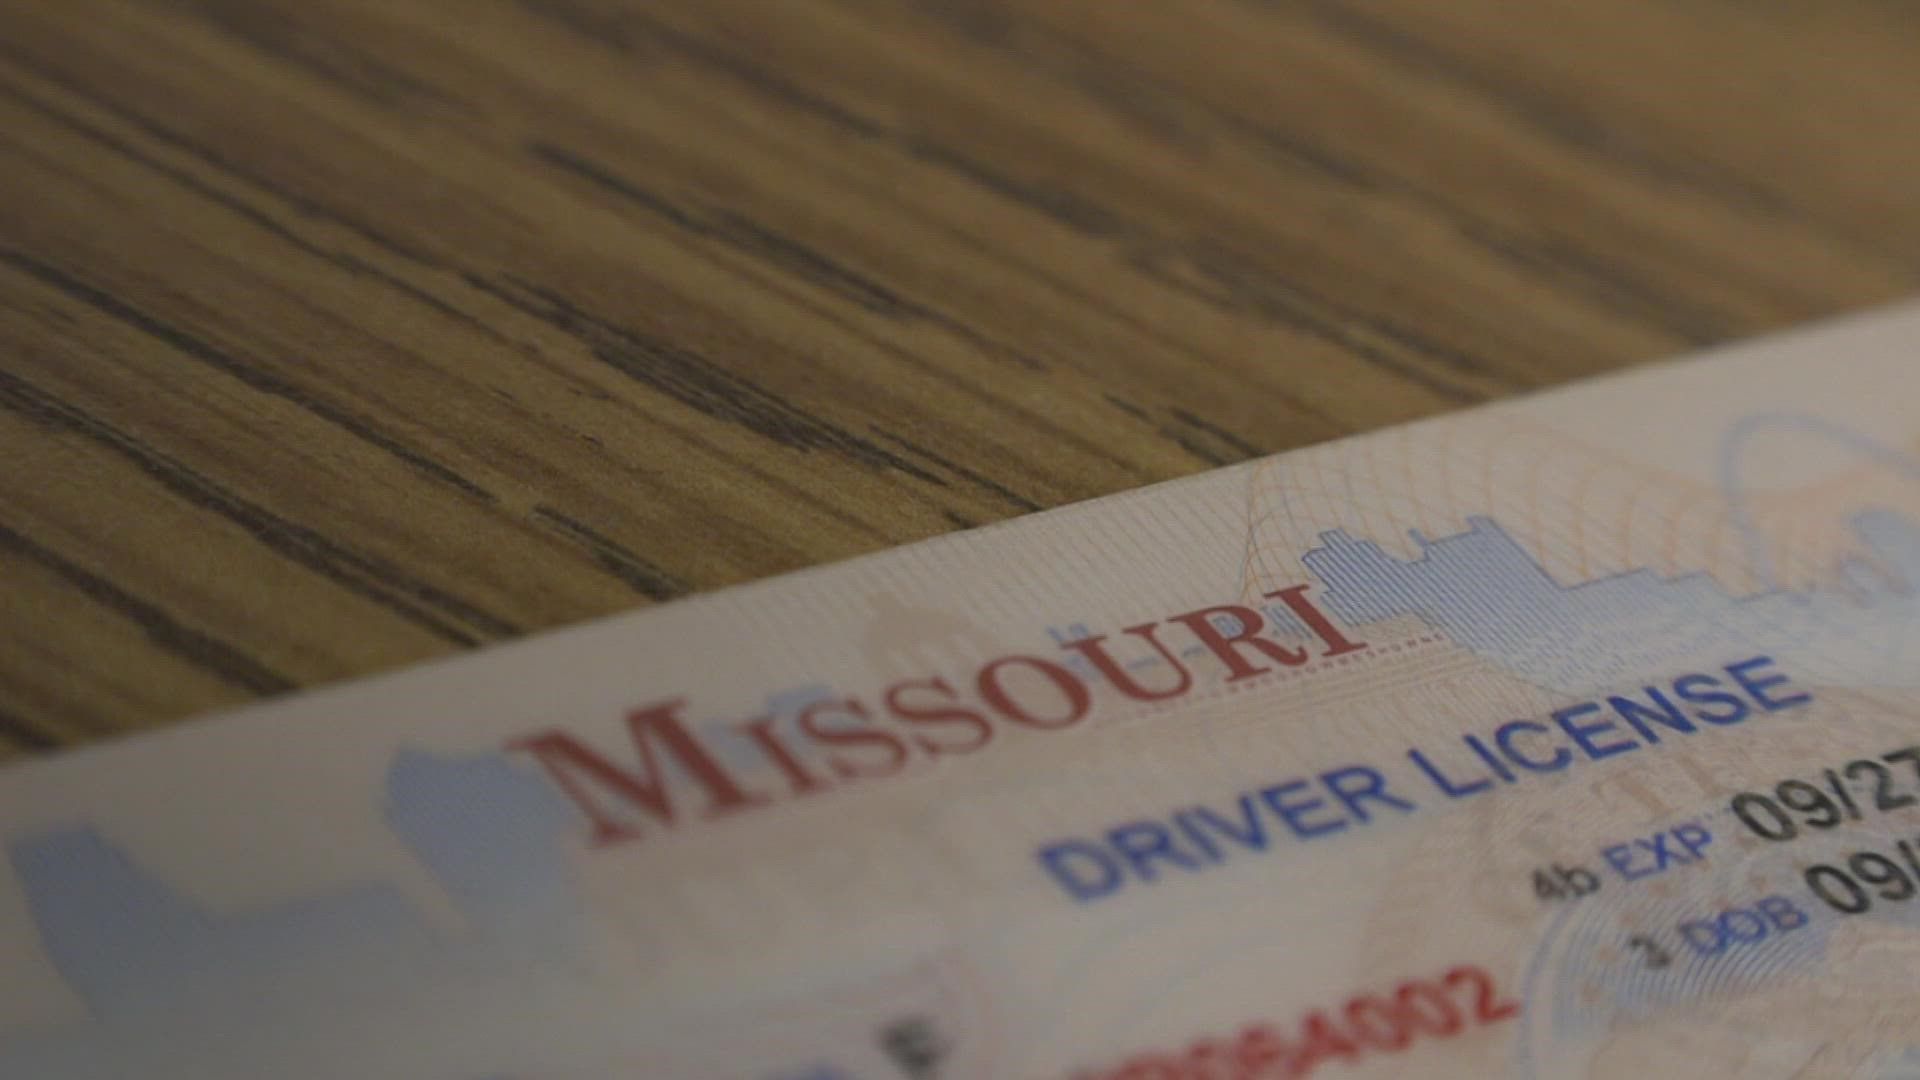 The core of the law requires voters to show unexpired government-issued photo IDs, meaning that student IDs and voter registration cards are not allowed.